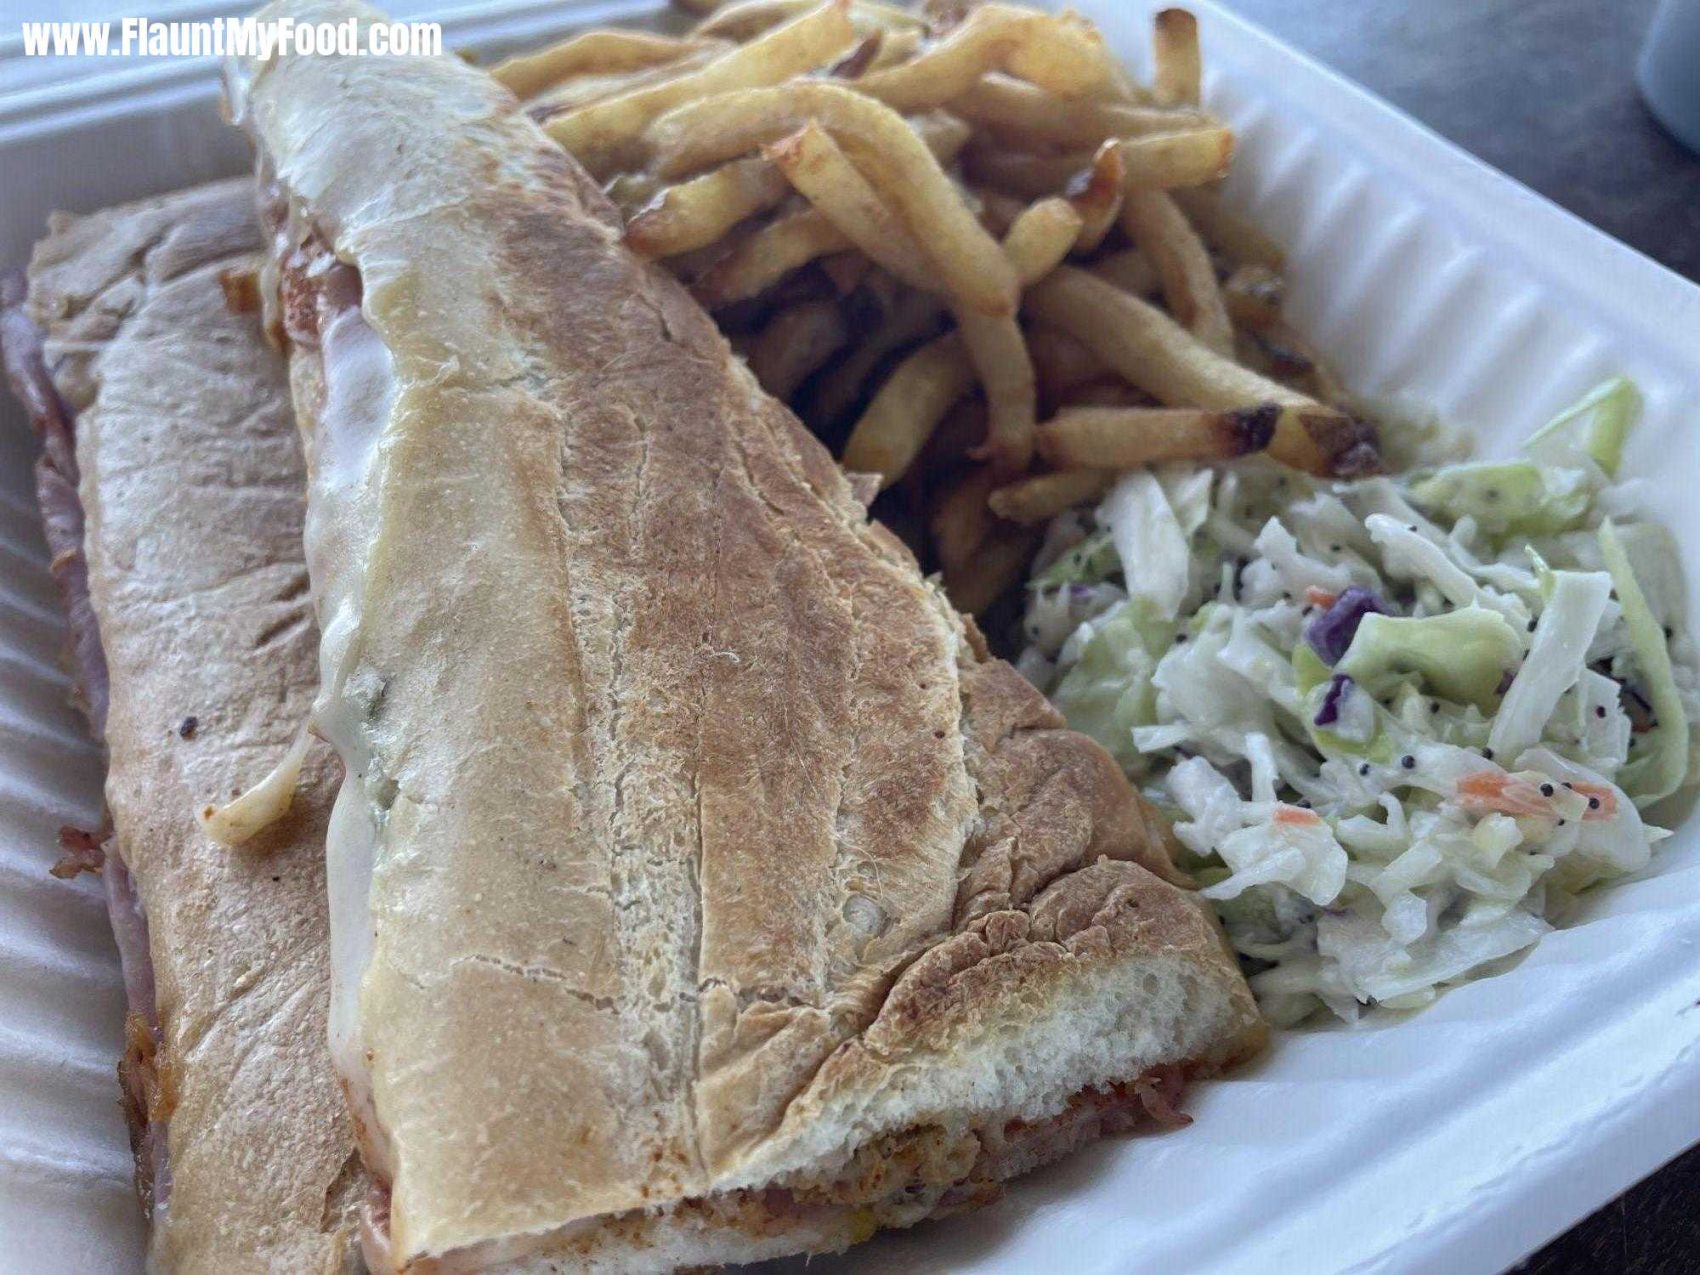 City pier Grill & bait Reuben sandwich with french fries and coleslaw Anna Maria Island Florida